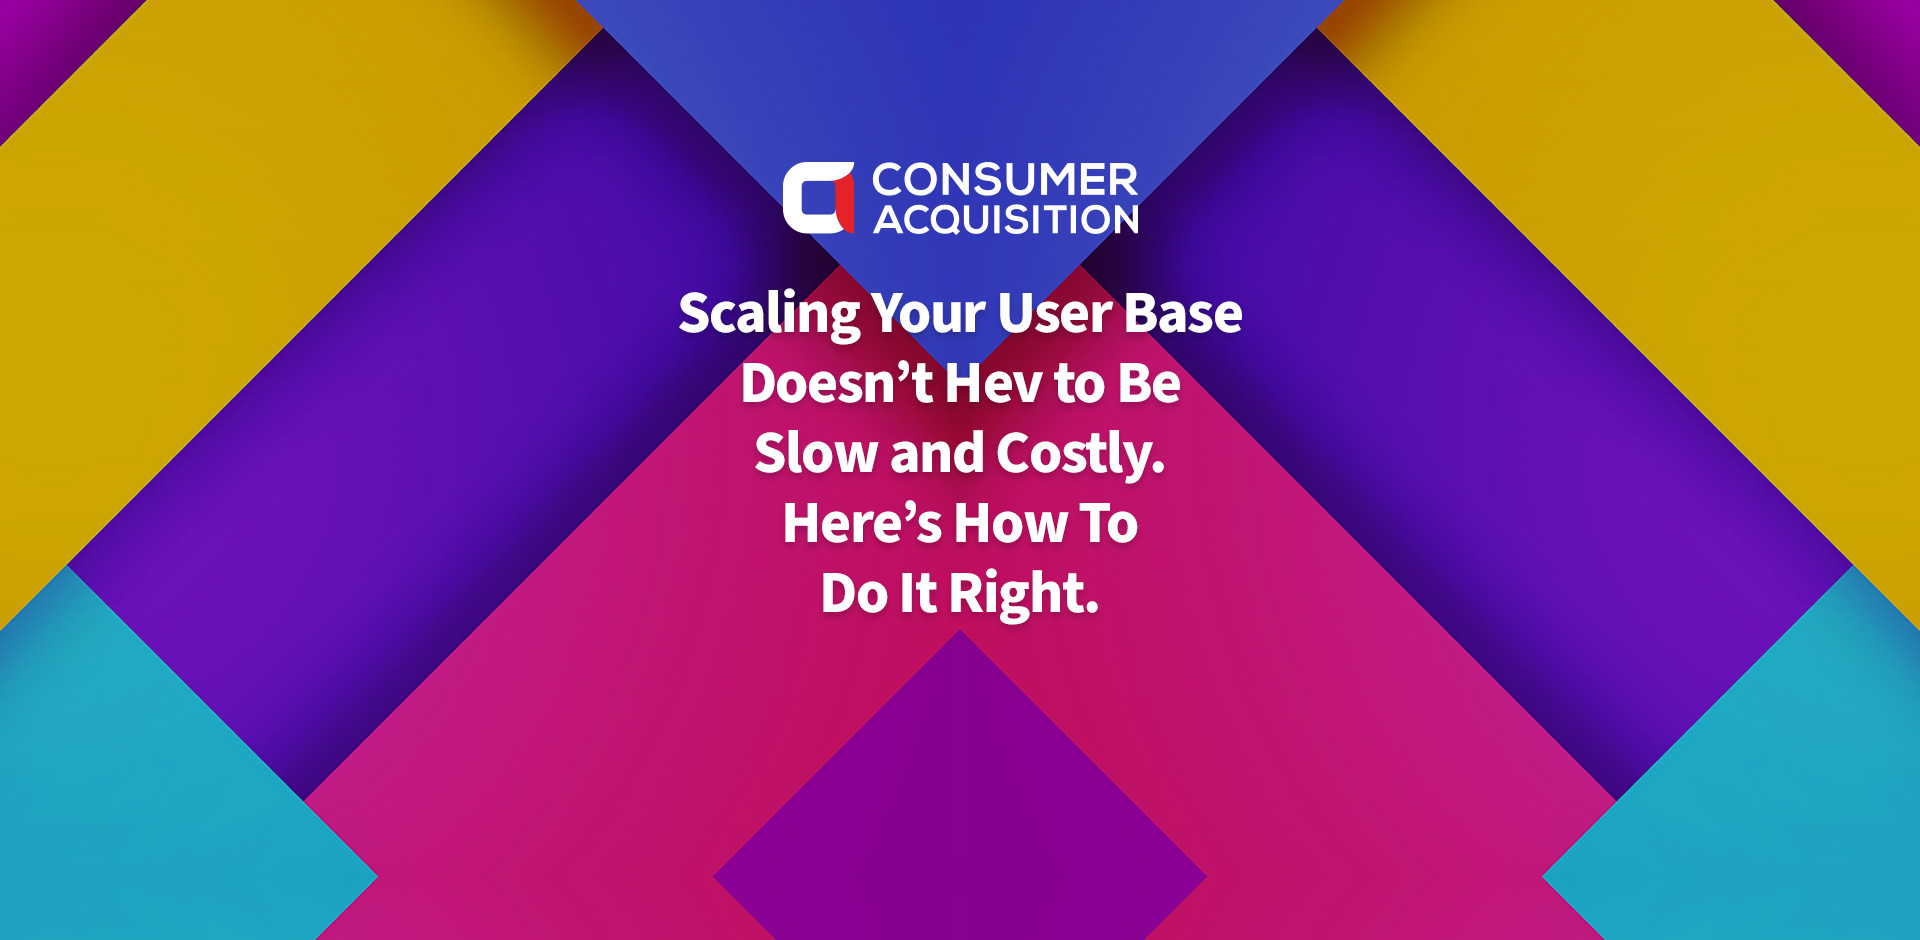 Scaling Your User Base Doesn’t Have to Be Slow and Costly. Here’s How To Do It Right.